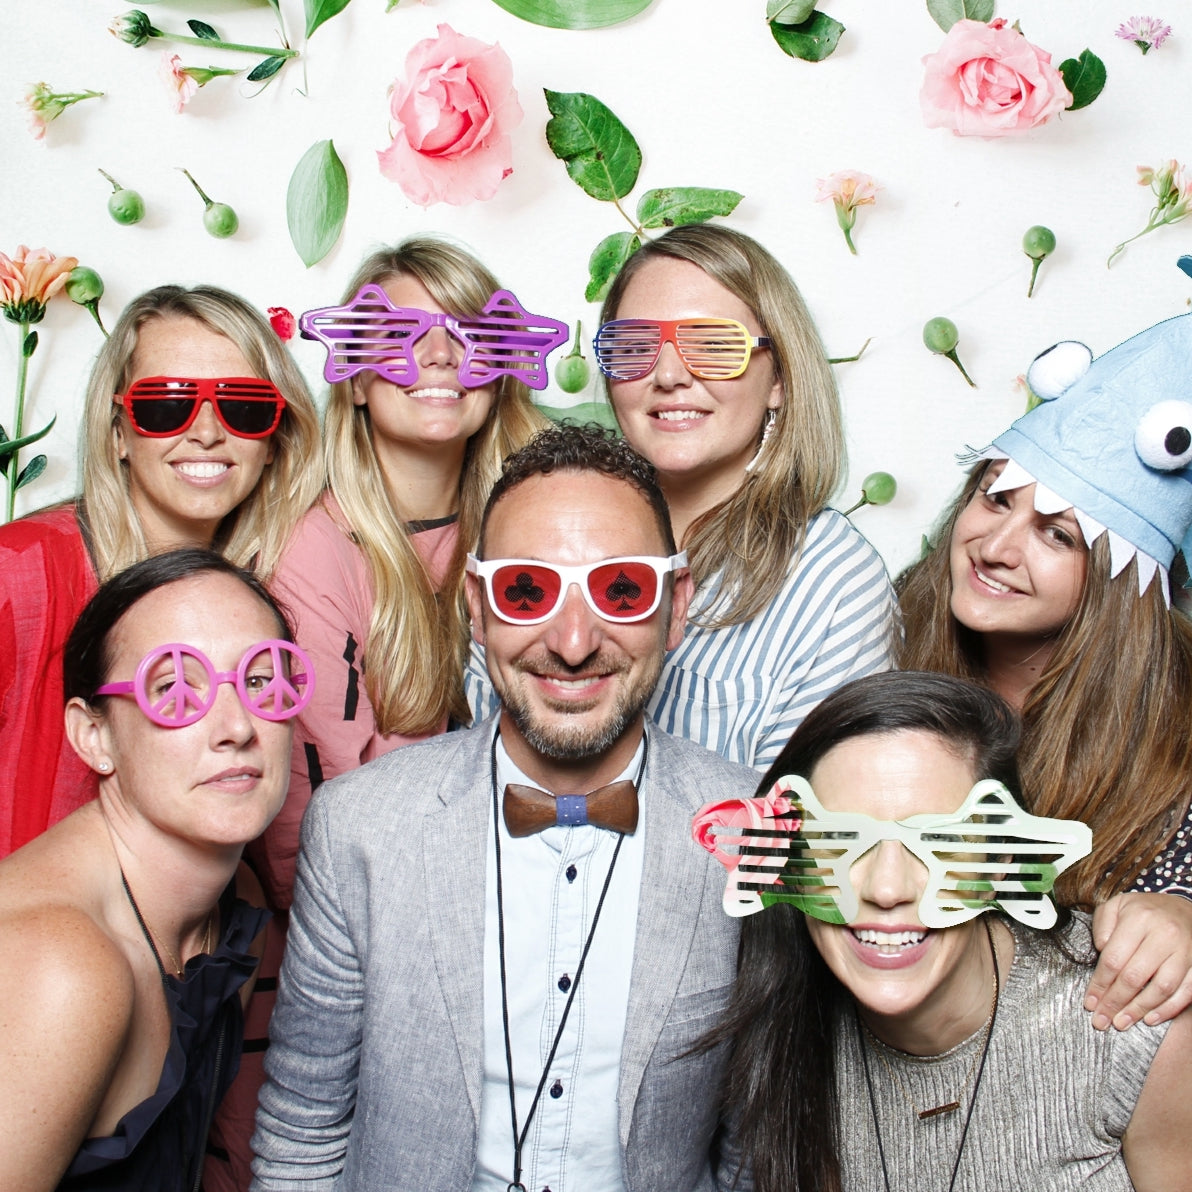 Coworkers from Urban Outfitters in Philadelphia posing in a photo booth with silly glasses